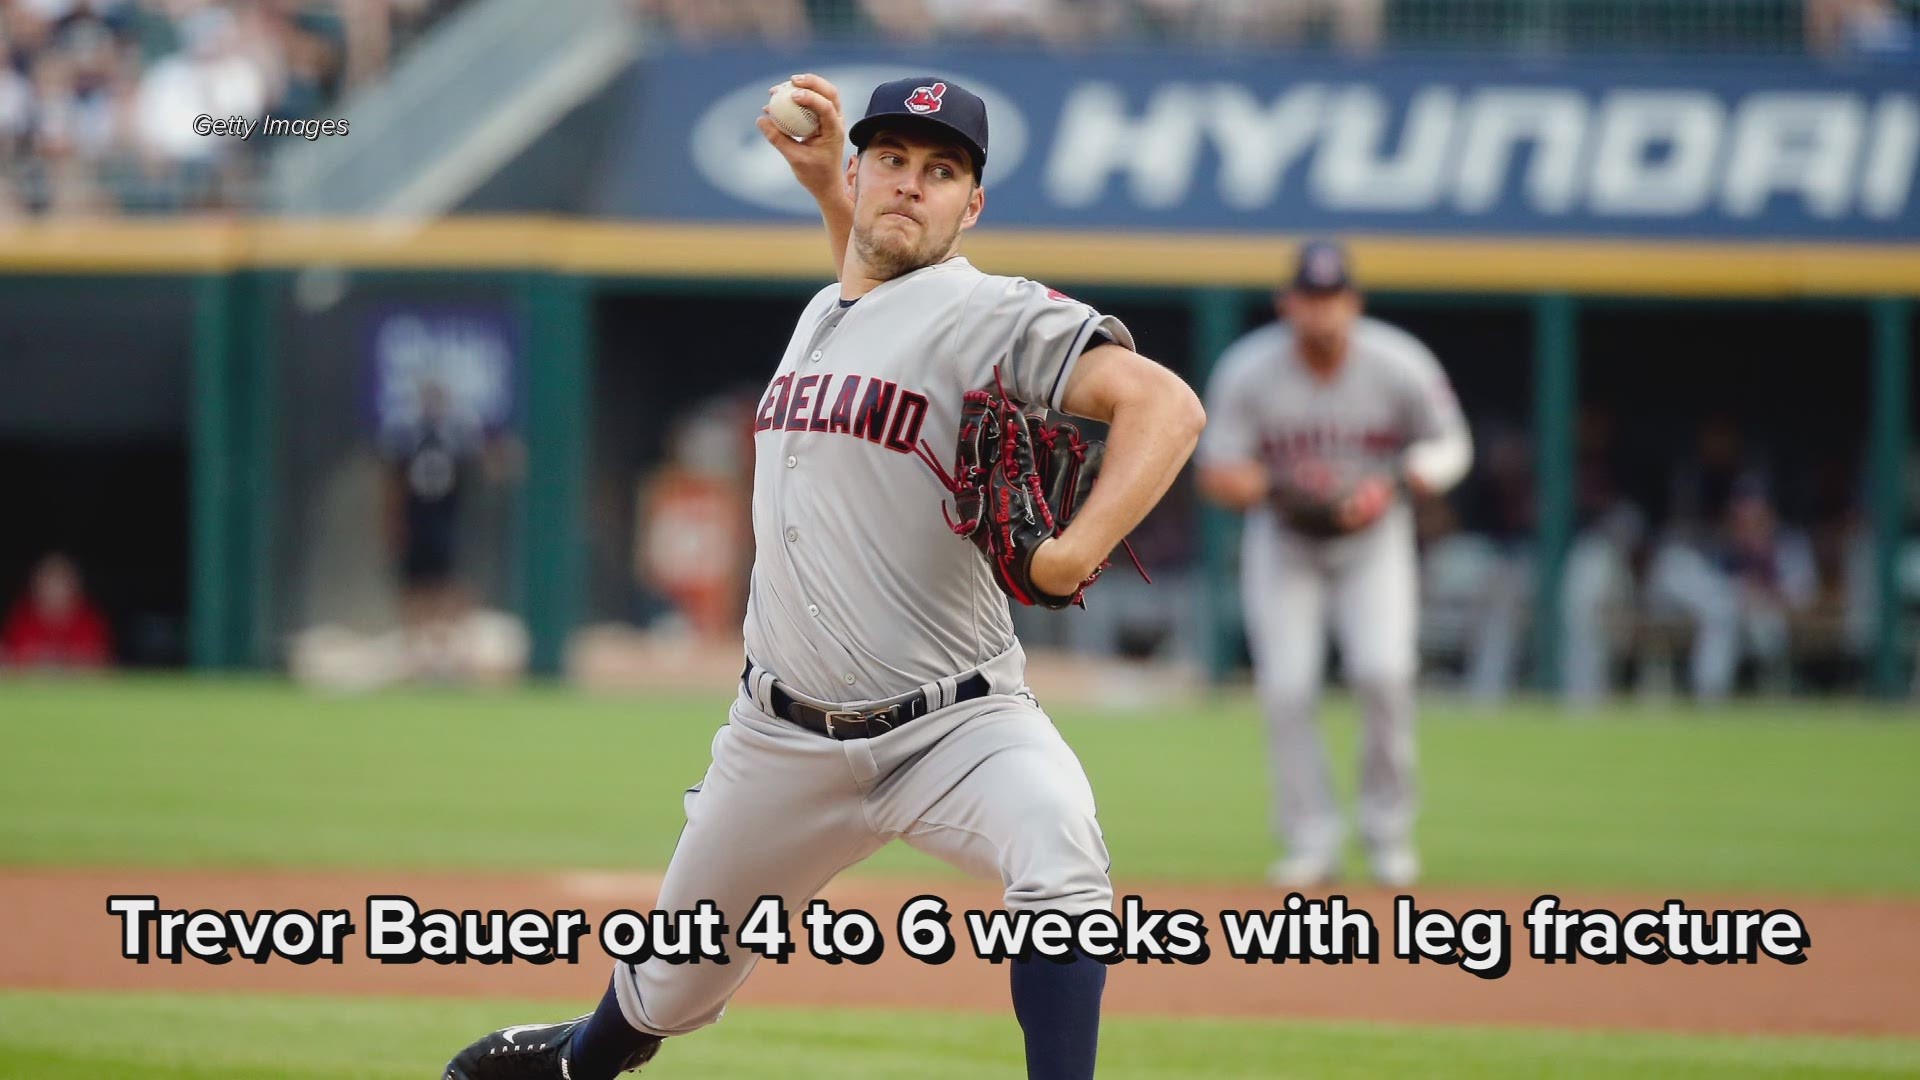 Cleveland Indians' Trevor Bauer out 4 to 6 weeks with leg fracture